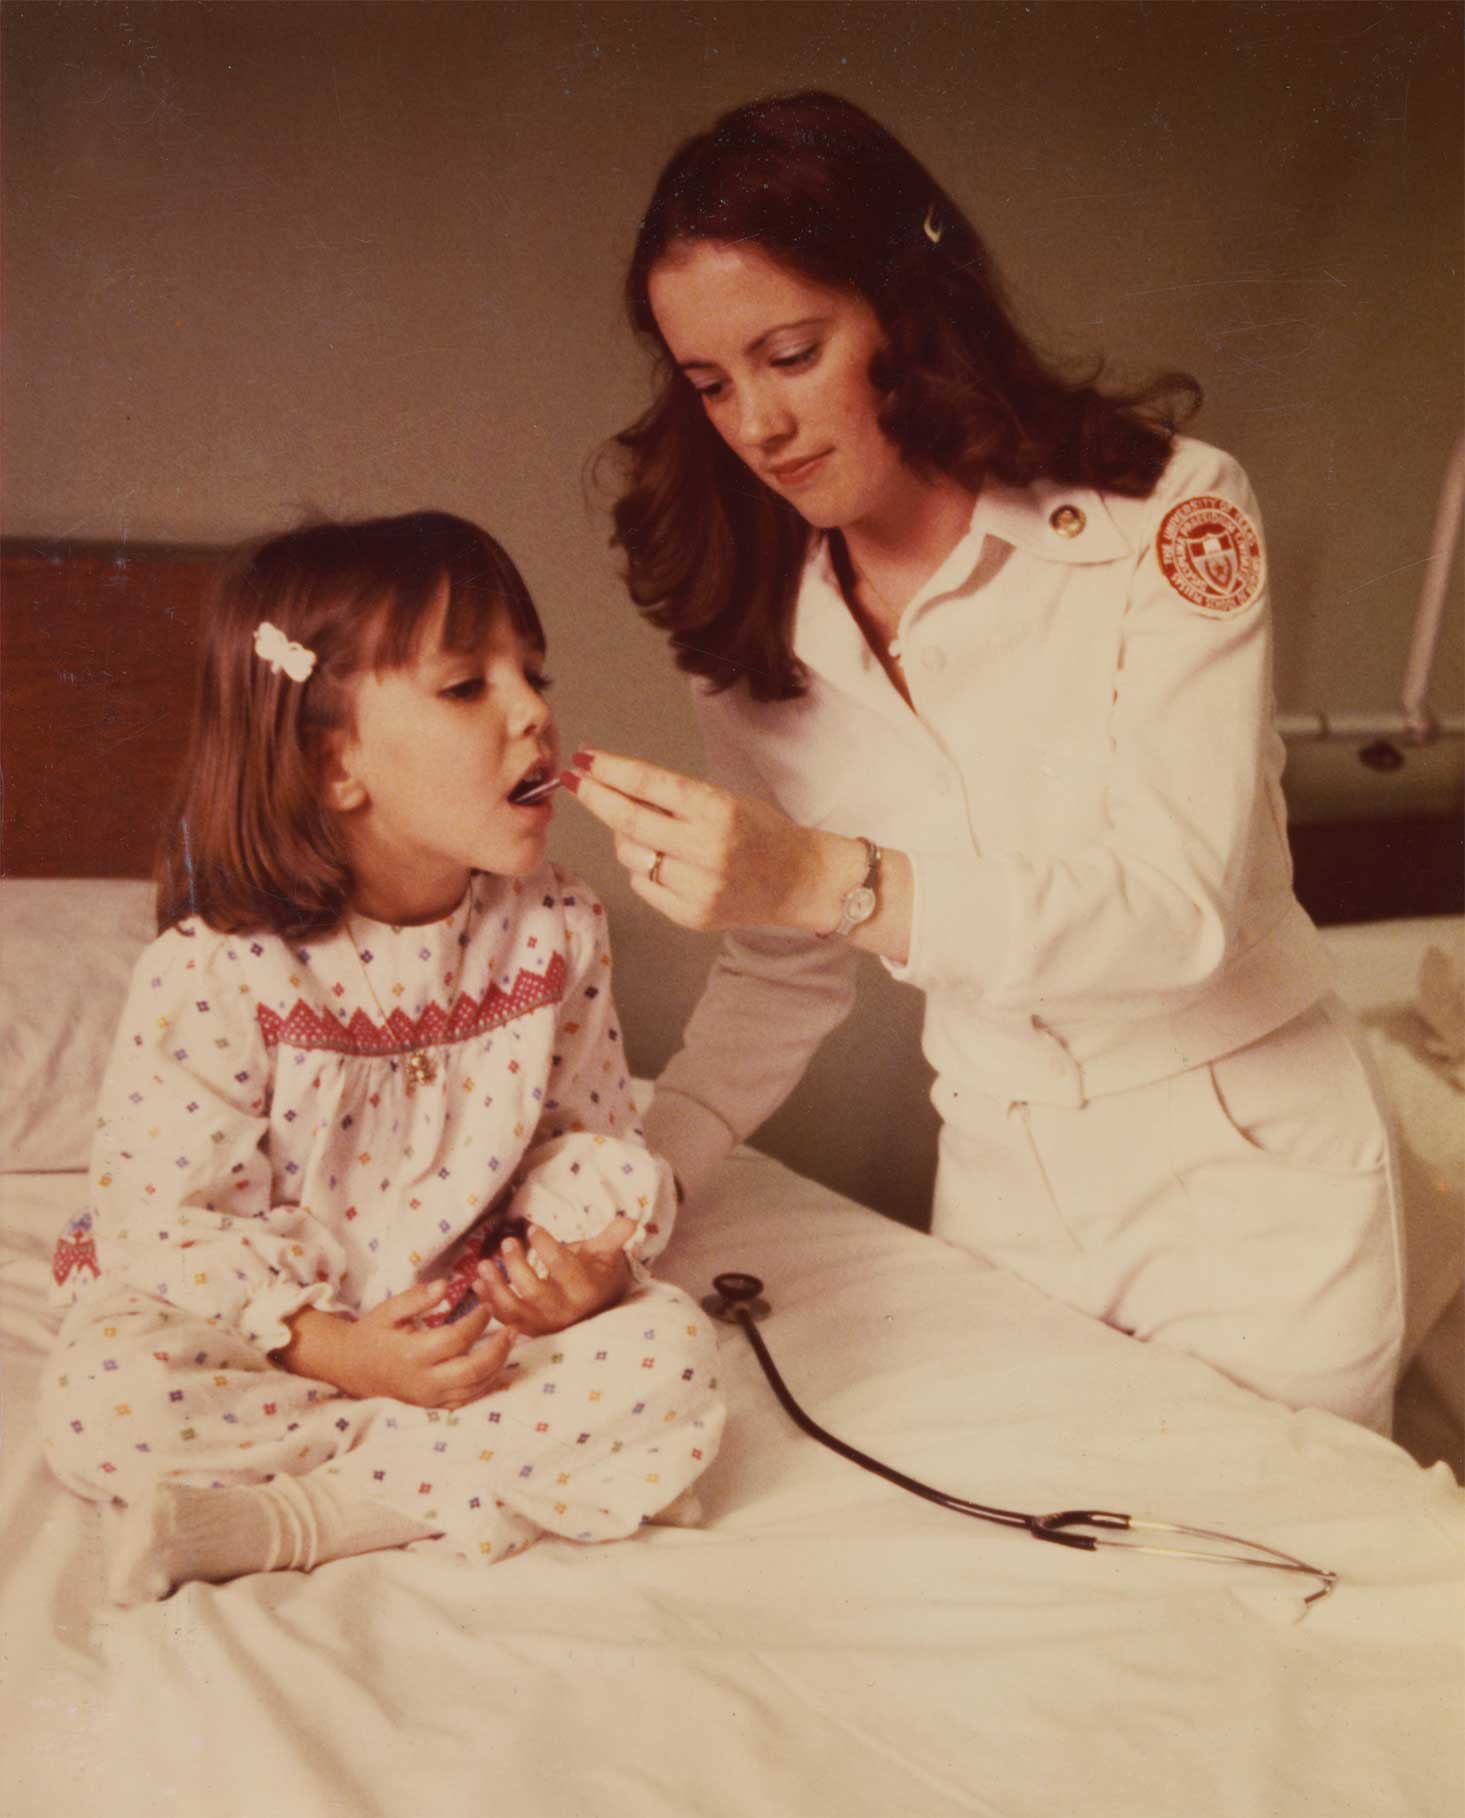 Nurse taking the temperature of a girl sitting on a hospital bed.